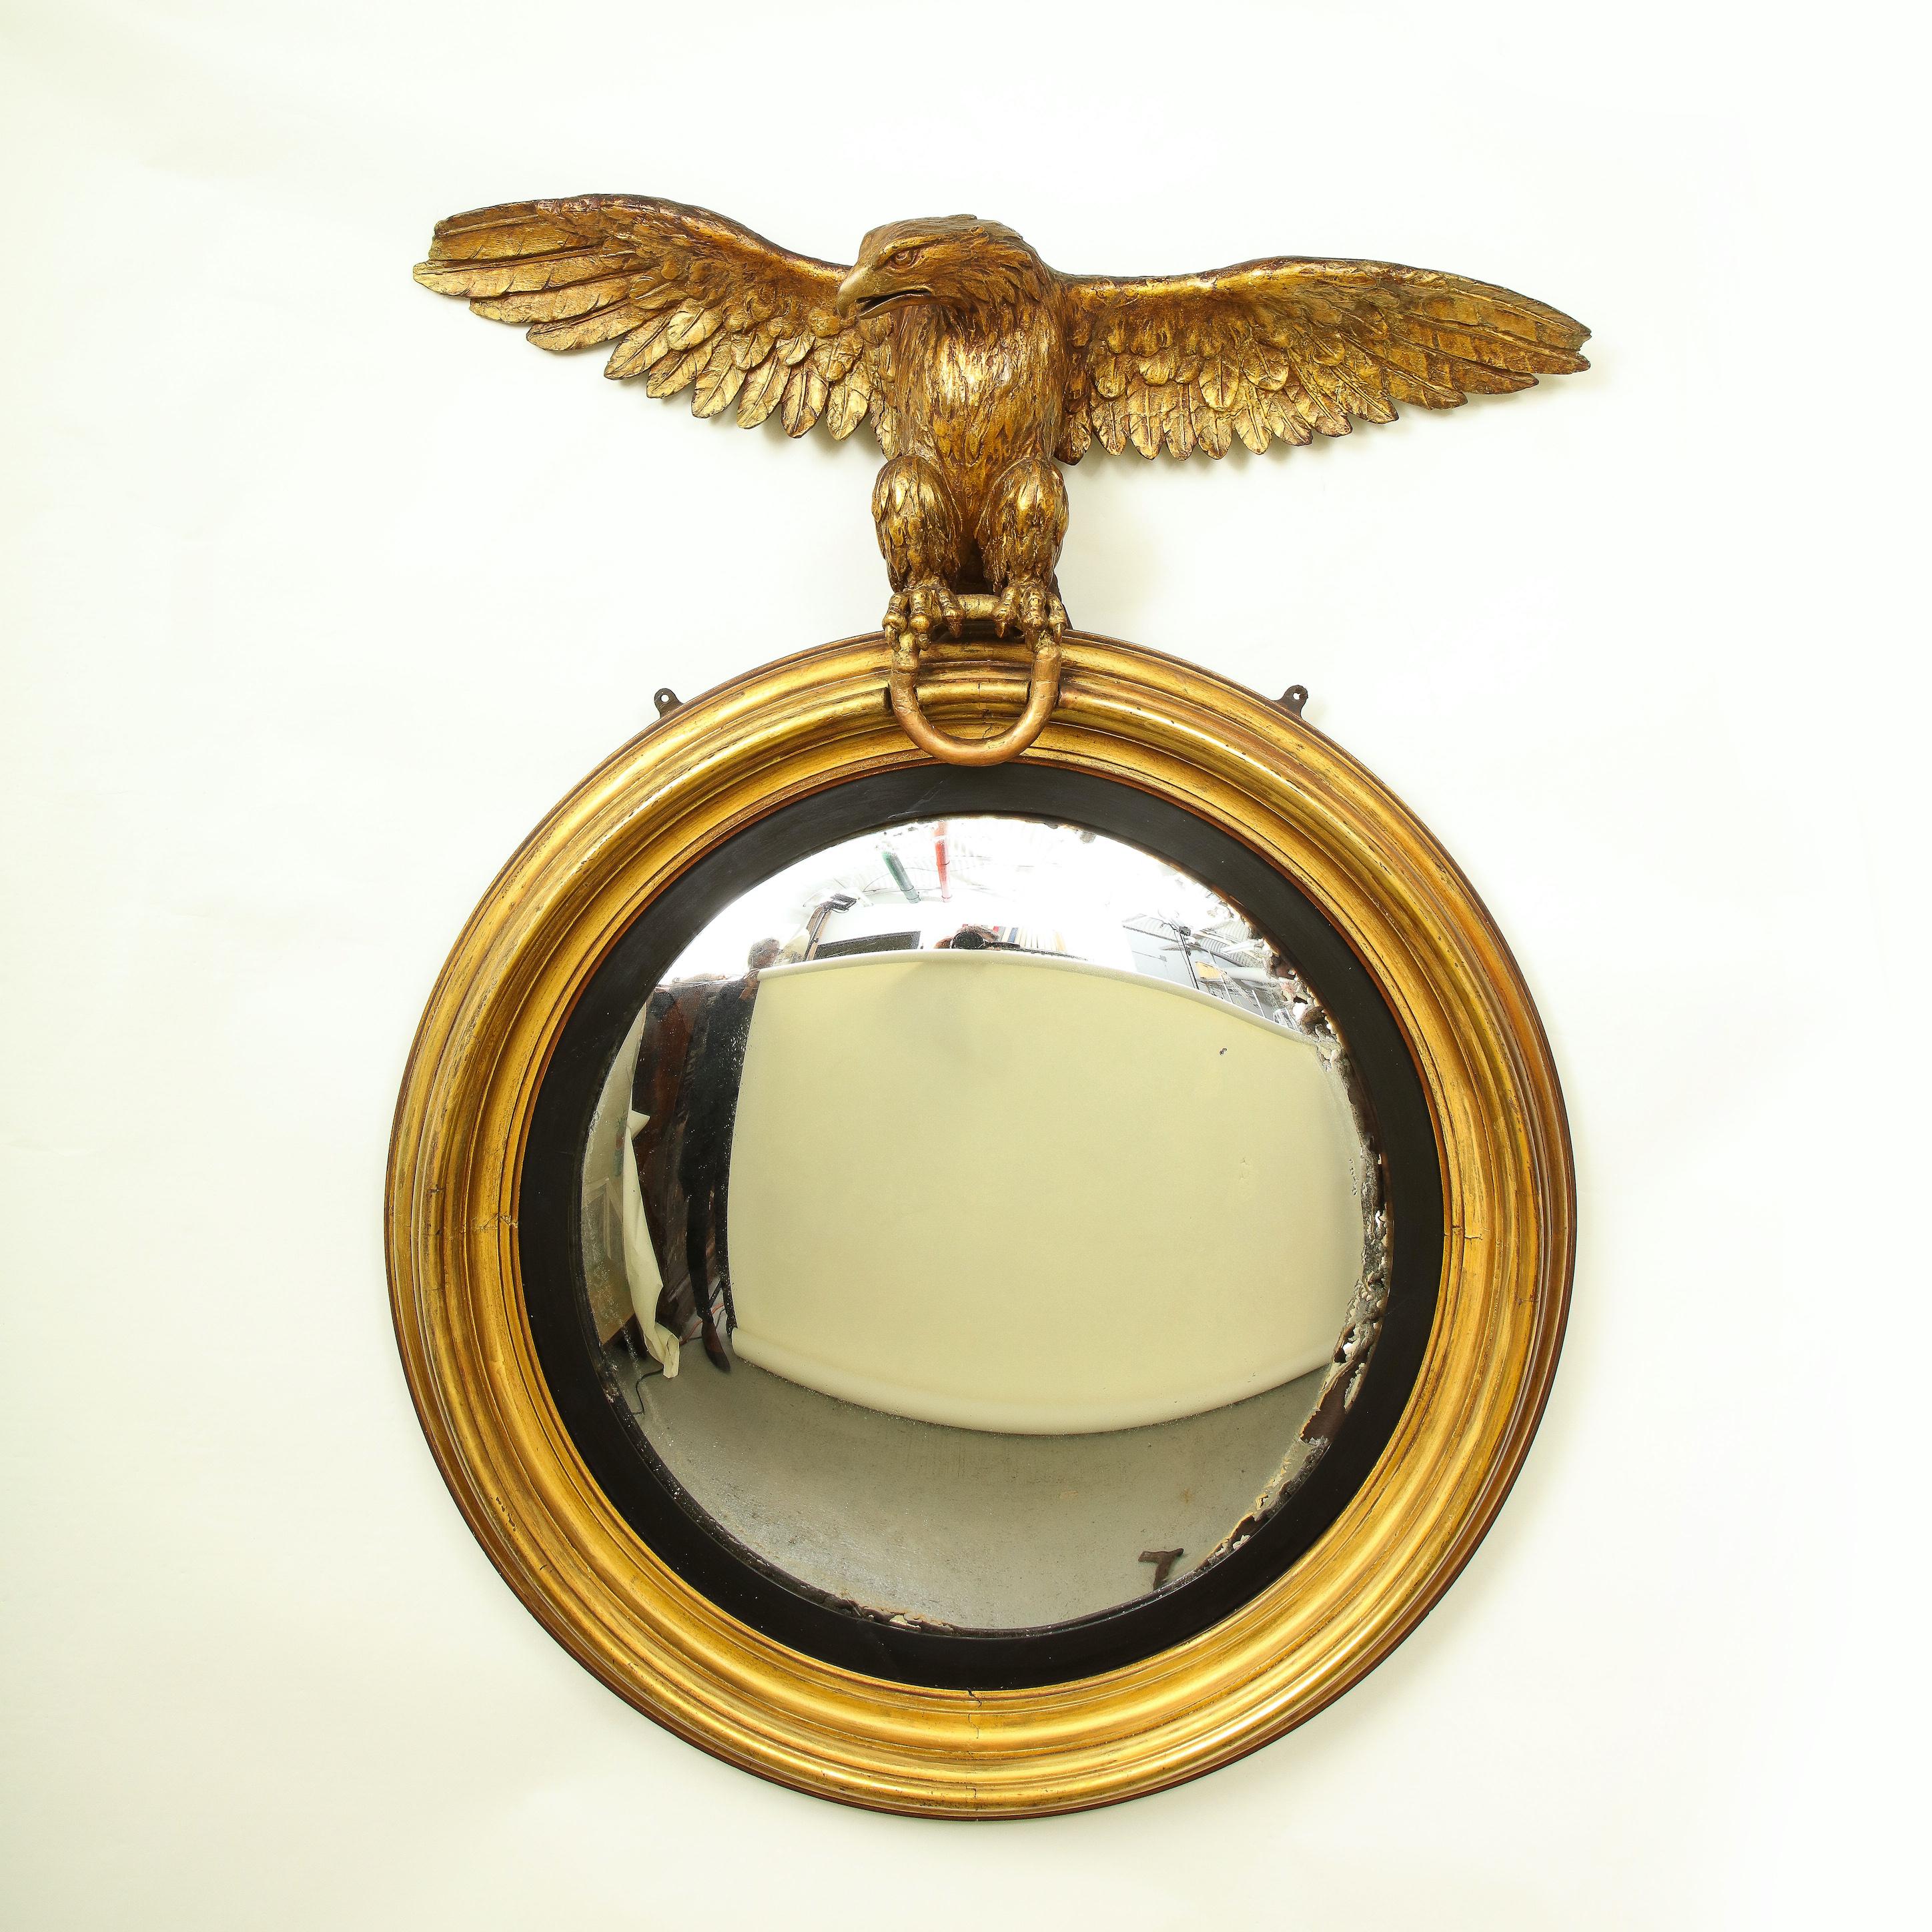 The circular convex mirror plate within a black slip and molded giltwood surround, surmounted by an outstretched eagle perched on ring.

Provenance: From the Collection of Mario Buatta, New York, NY.